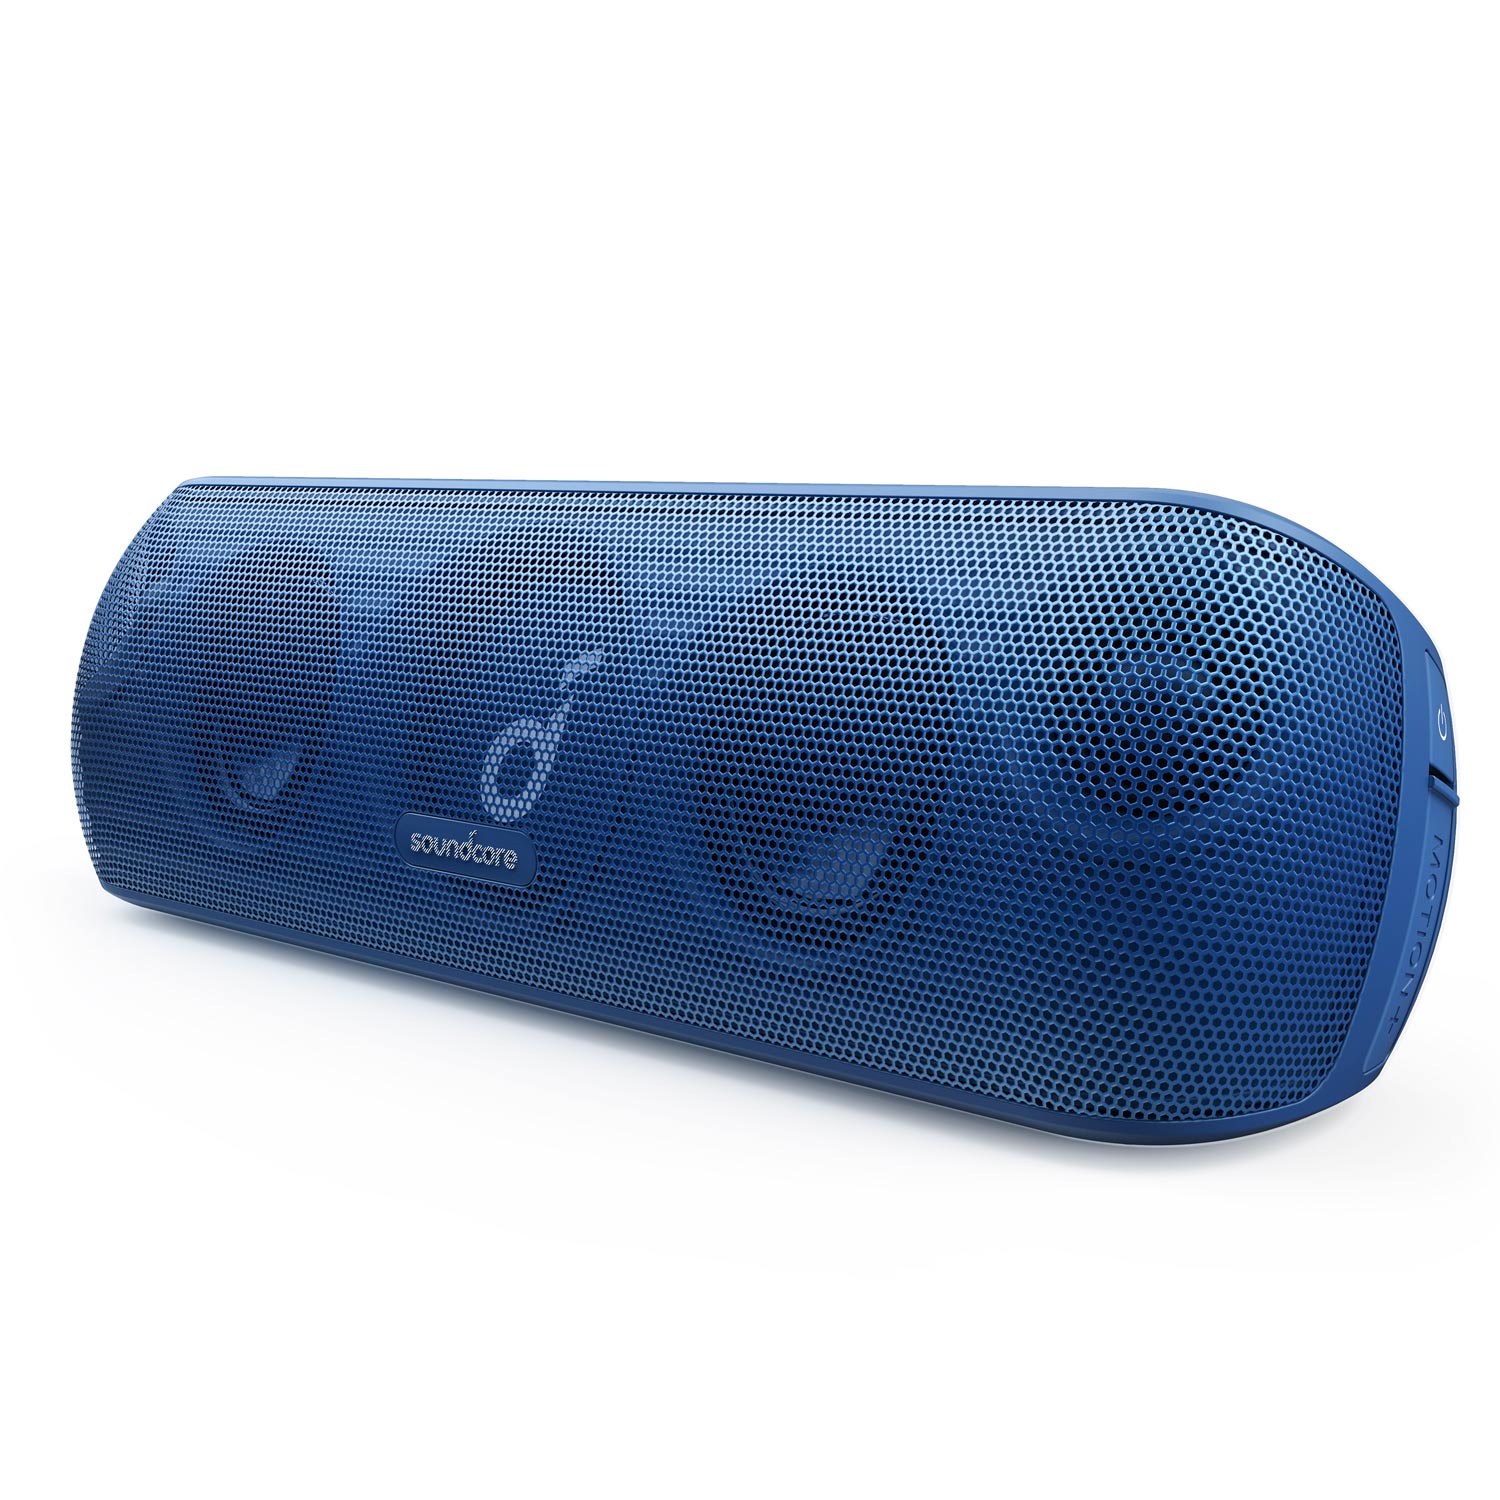 Soundcore Motion+ Wireless Bluetooth Speaker with Hi-Res 30W Audio,Waterproof, App Control (Blue) - image 1 of 8